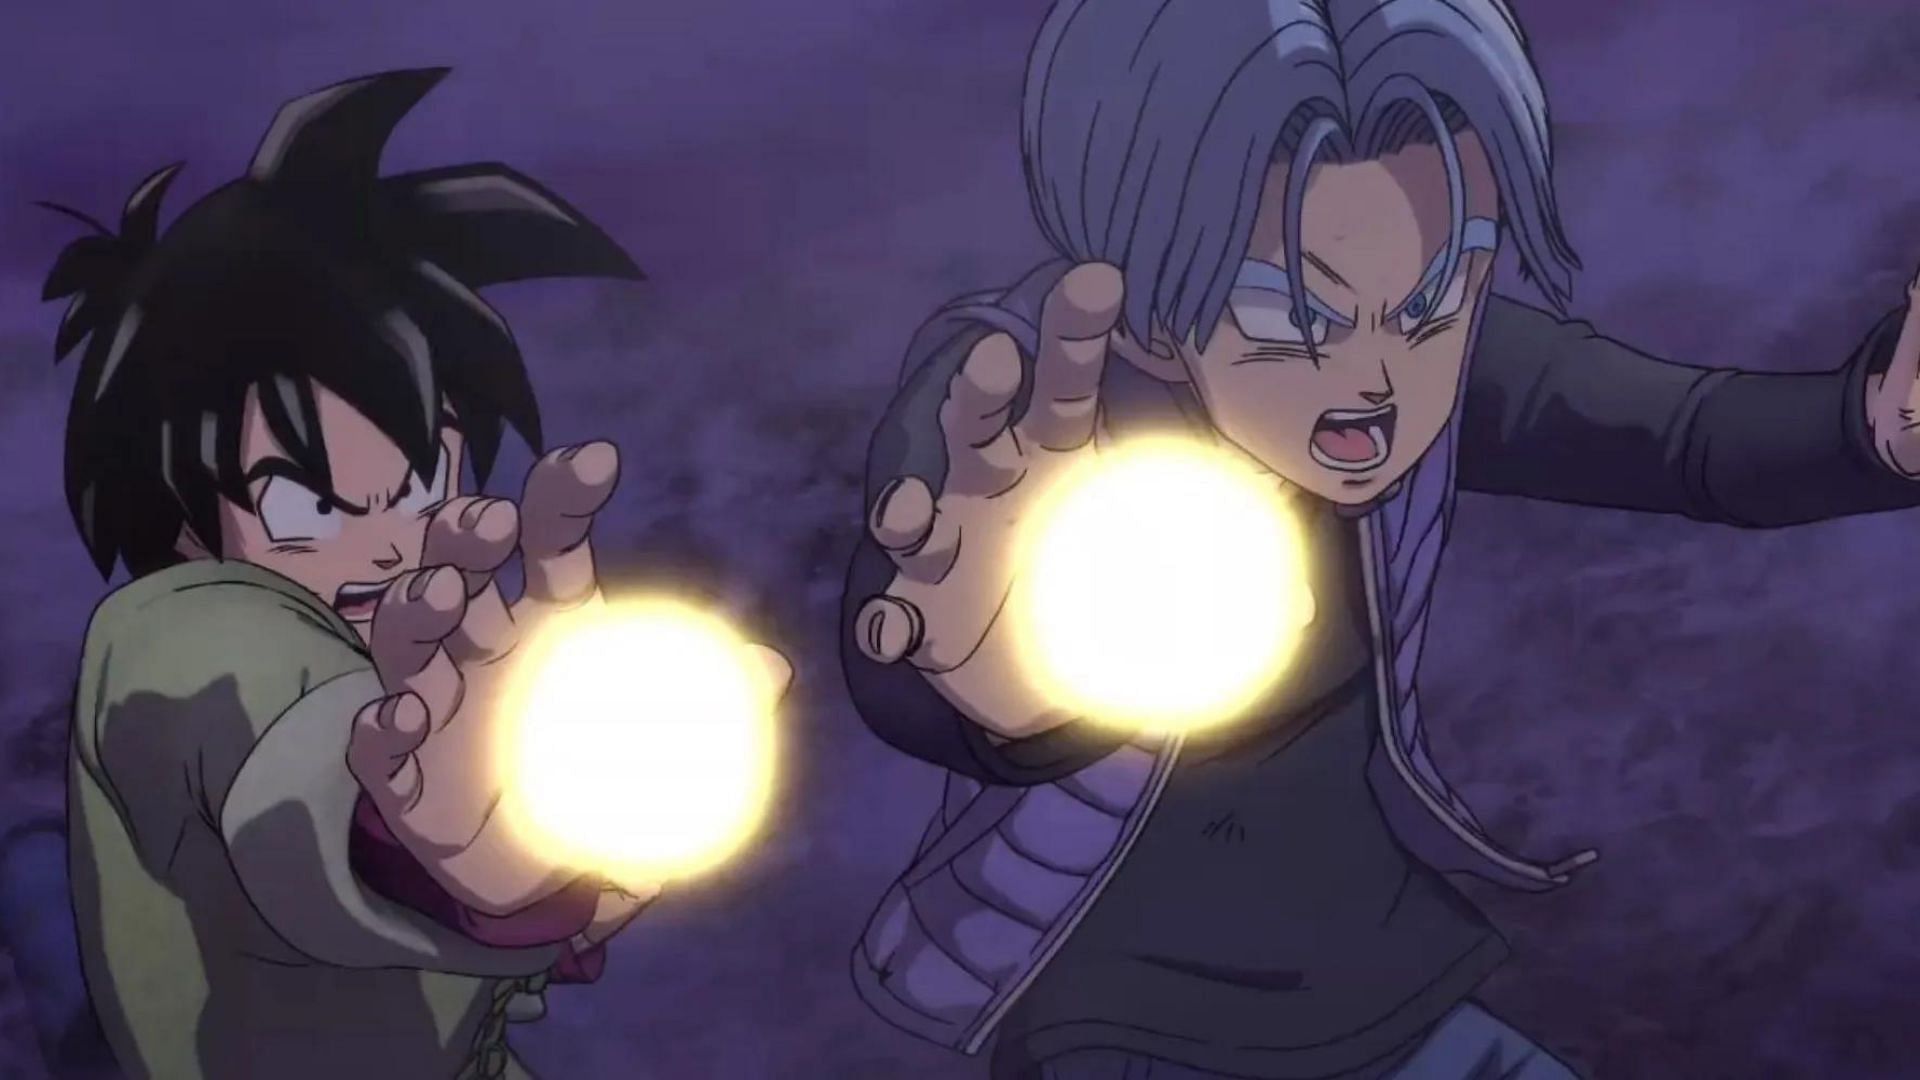 Goten and Trunks as seen in Dragon Ball Super: Super Hero (Image via Toei Animation)